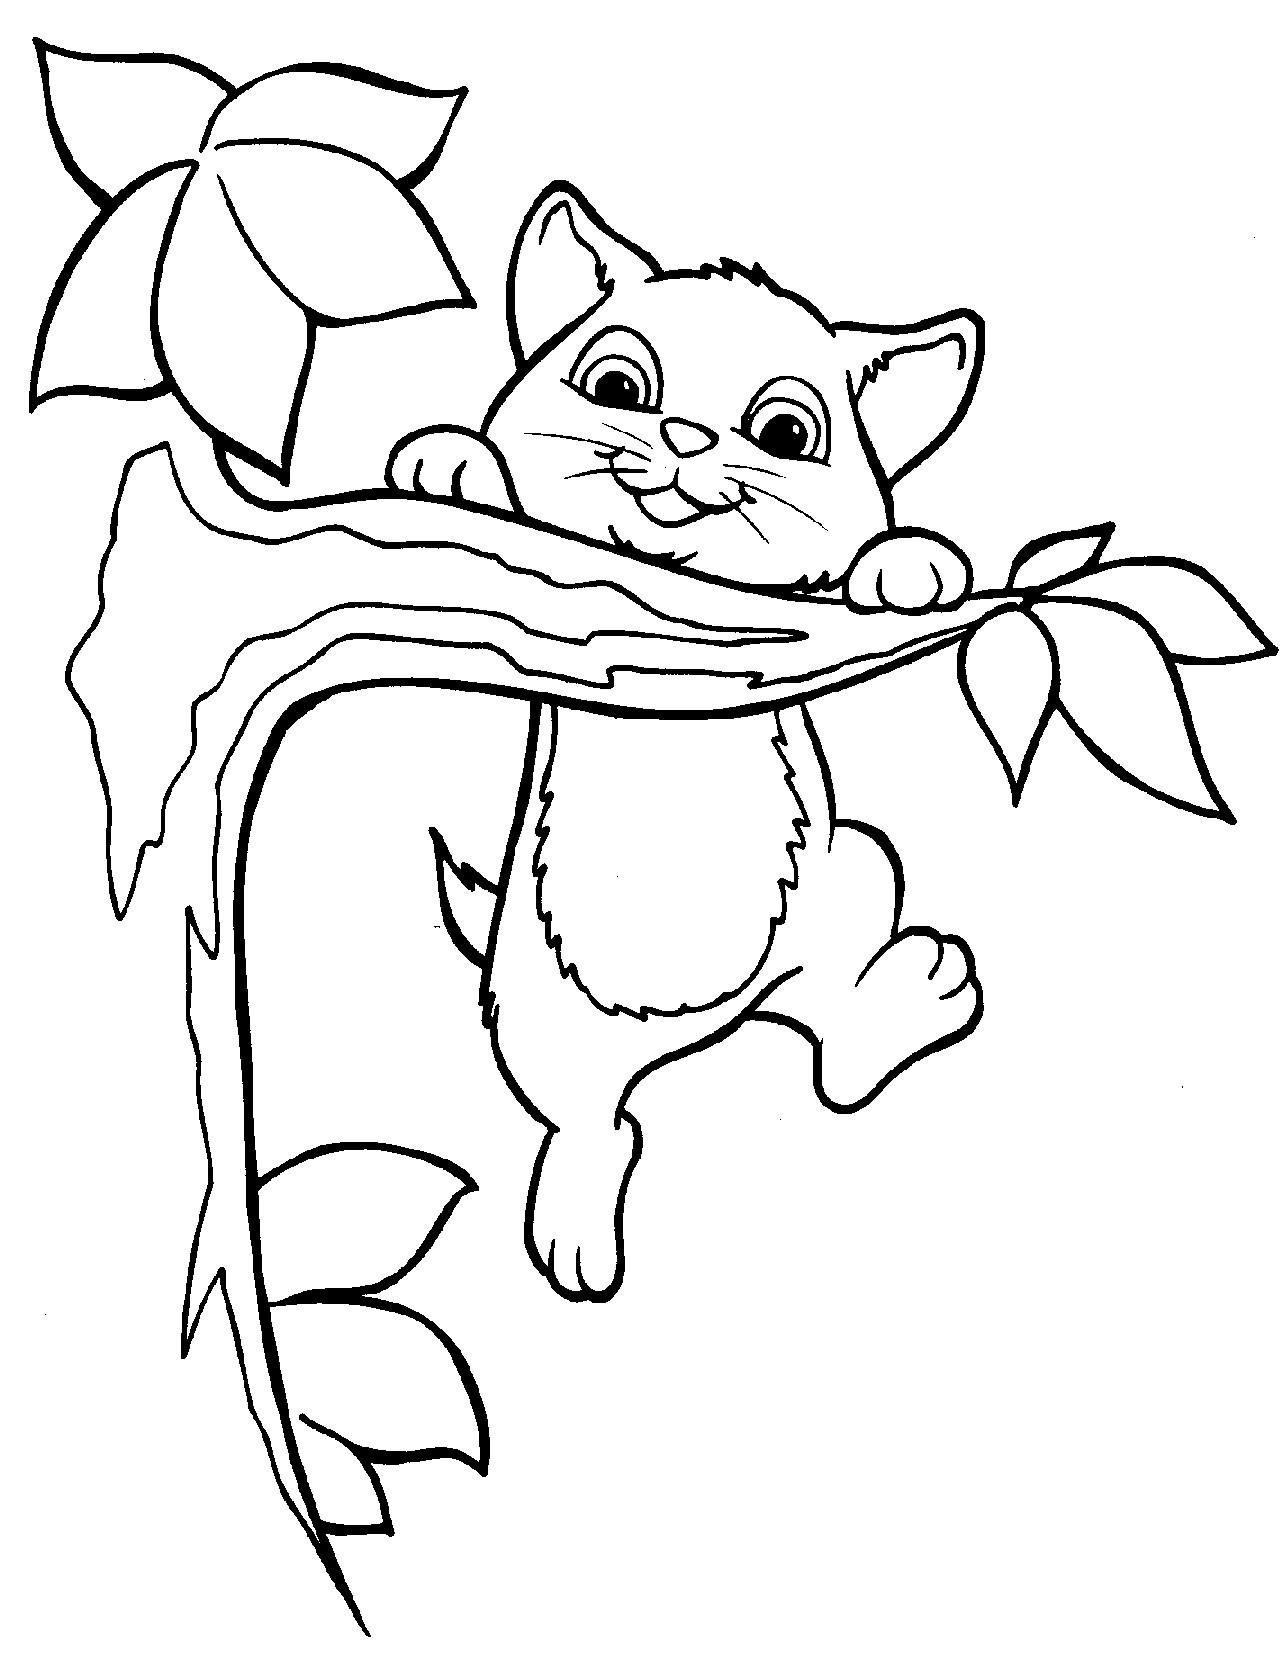 Litten Coloring Pages
 Free Printable Kitten Coloring Pages For Kids Best